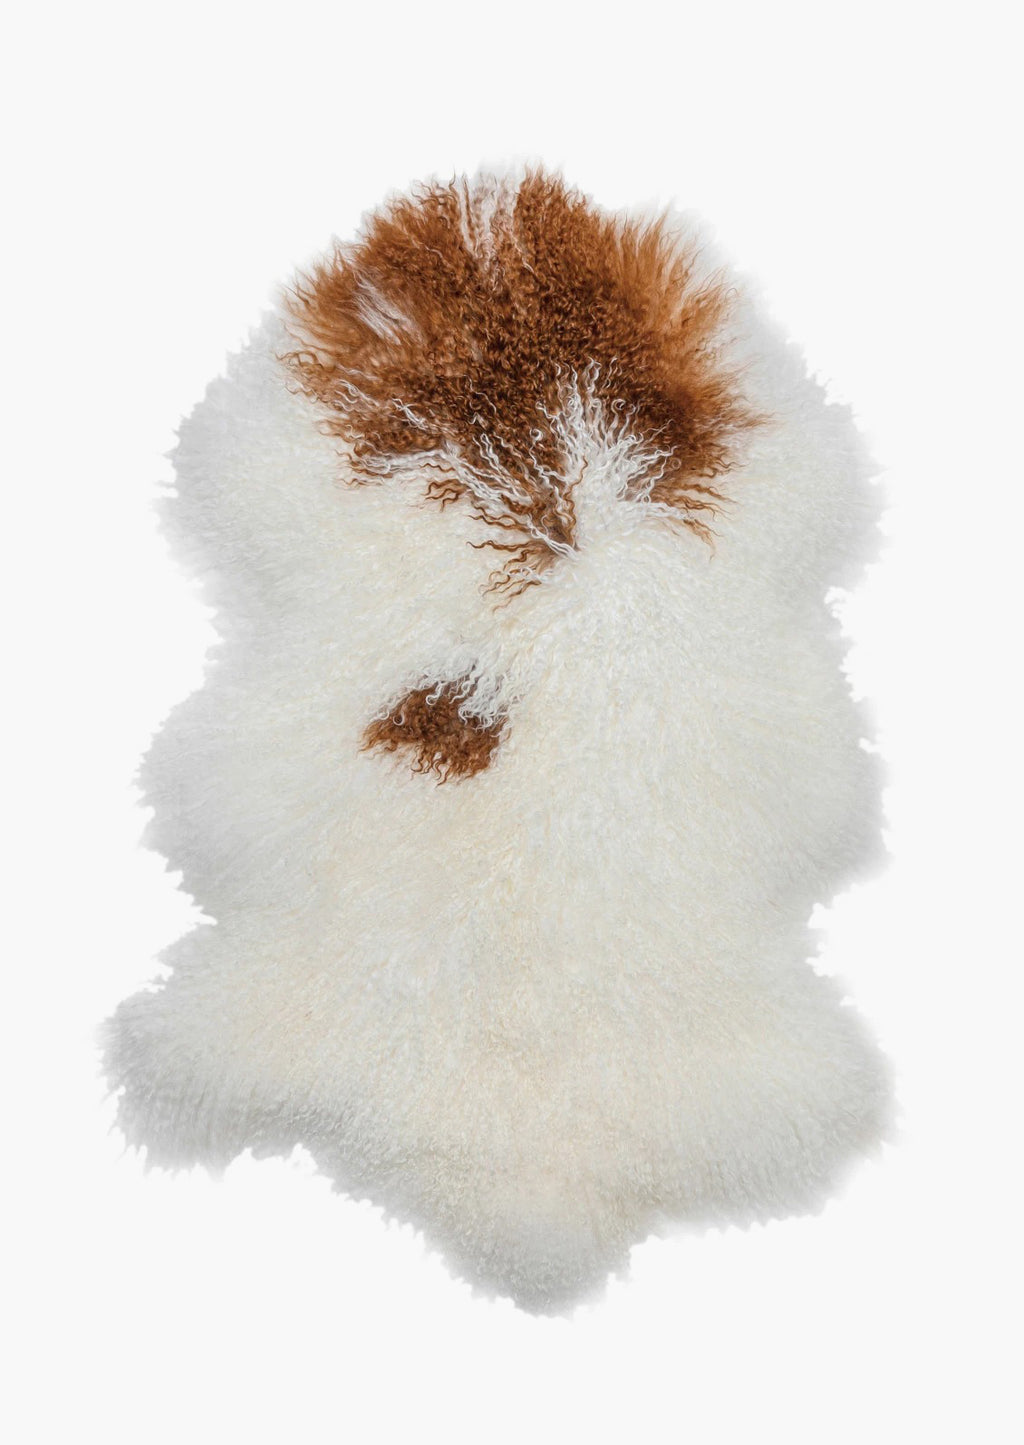 2: A cream and brown curly lamb fur hide.